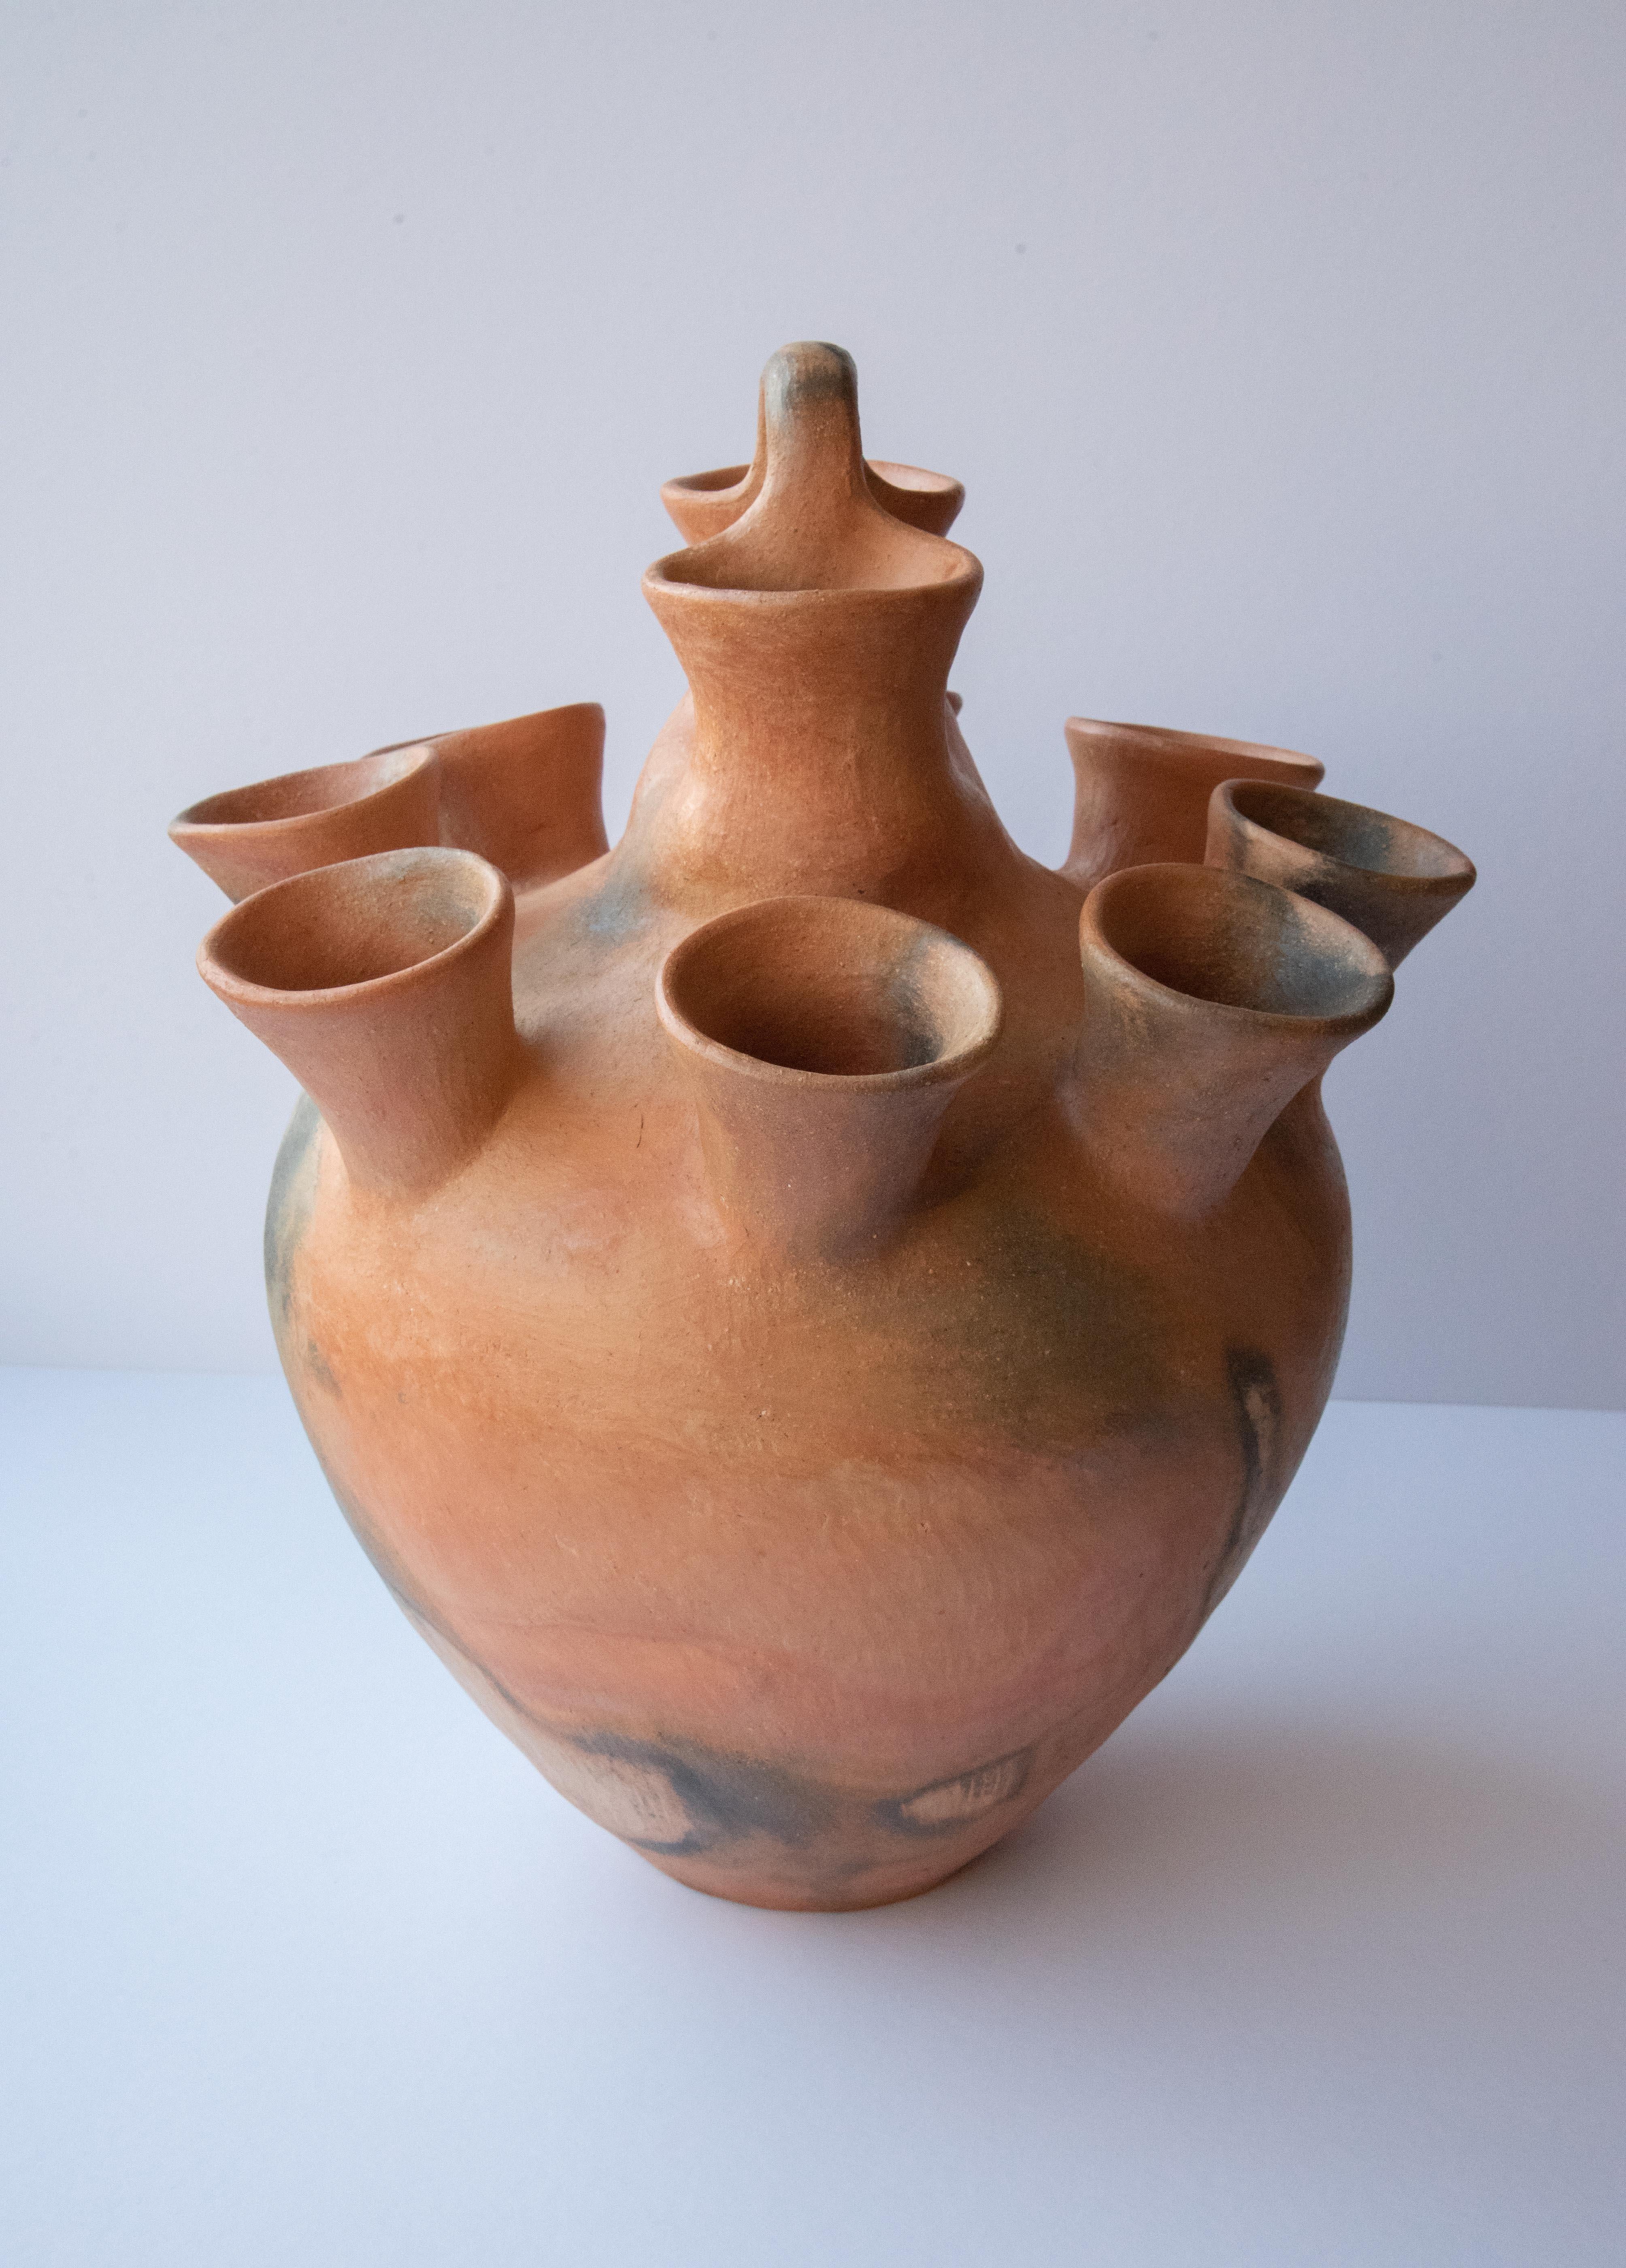 This beautiful ten mouth vessel is made in natural clay from the Sierra Norte Mountains, in Oaxaca. Cooked in Silvia Martinez's home-made oven made up of bricks, the piece is naturally burned with beautiful dark stains that give it a twist of